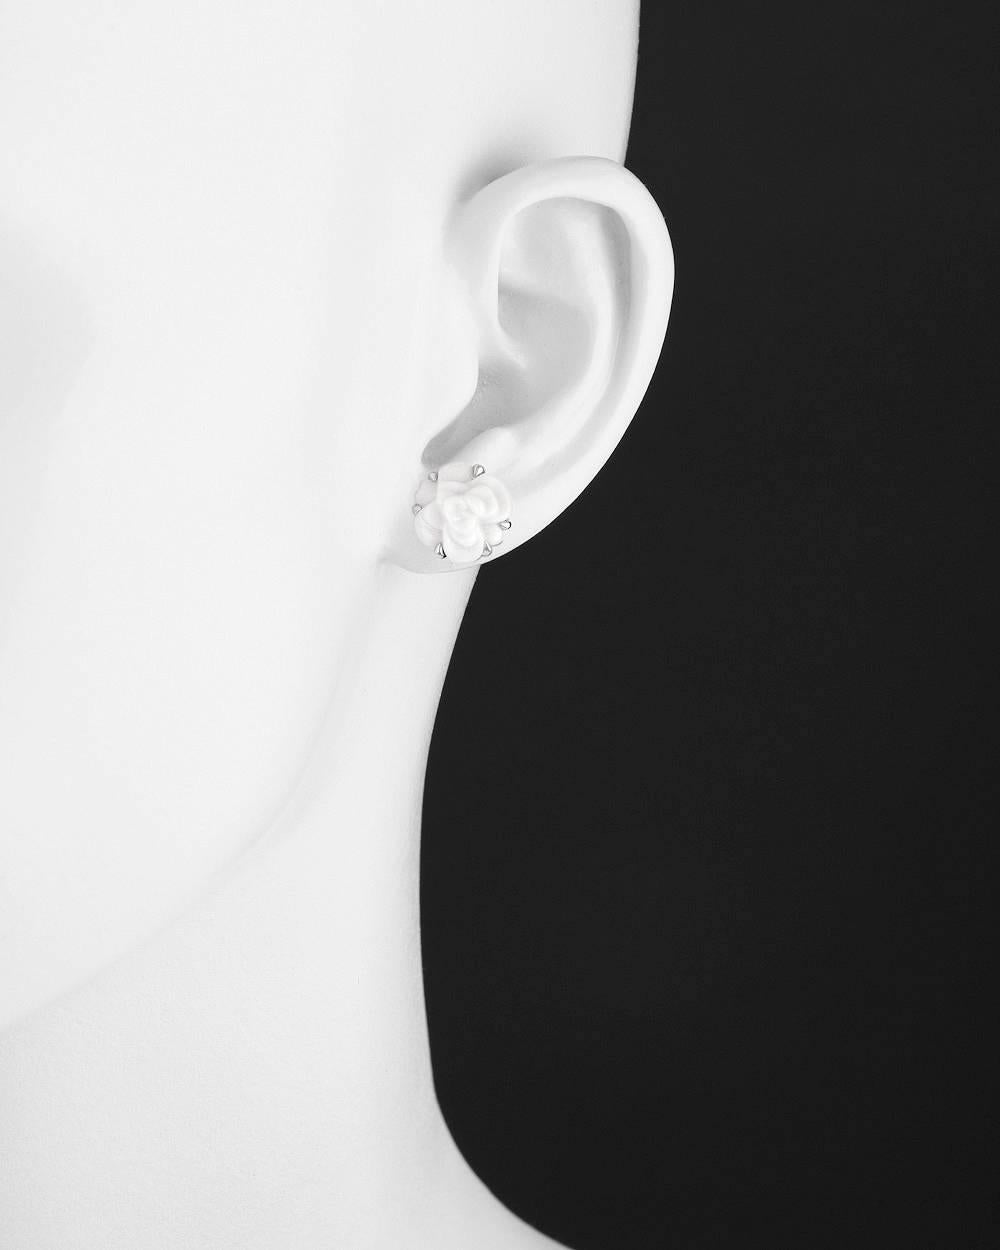 Camélia stud earrings, showcasing a carved white agate camellia flower motif, in 18k white gold, with posts and squeeze-style backs, signed Chanel. 0.5